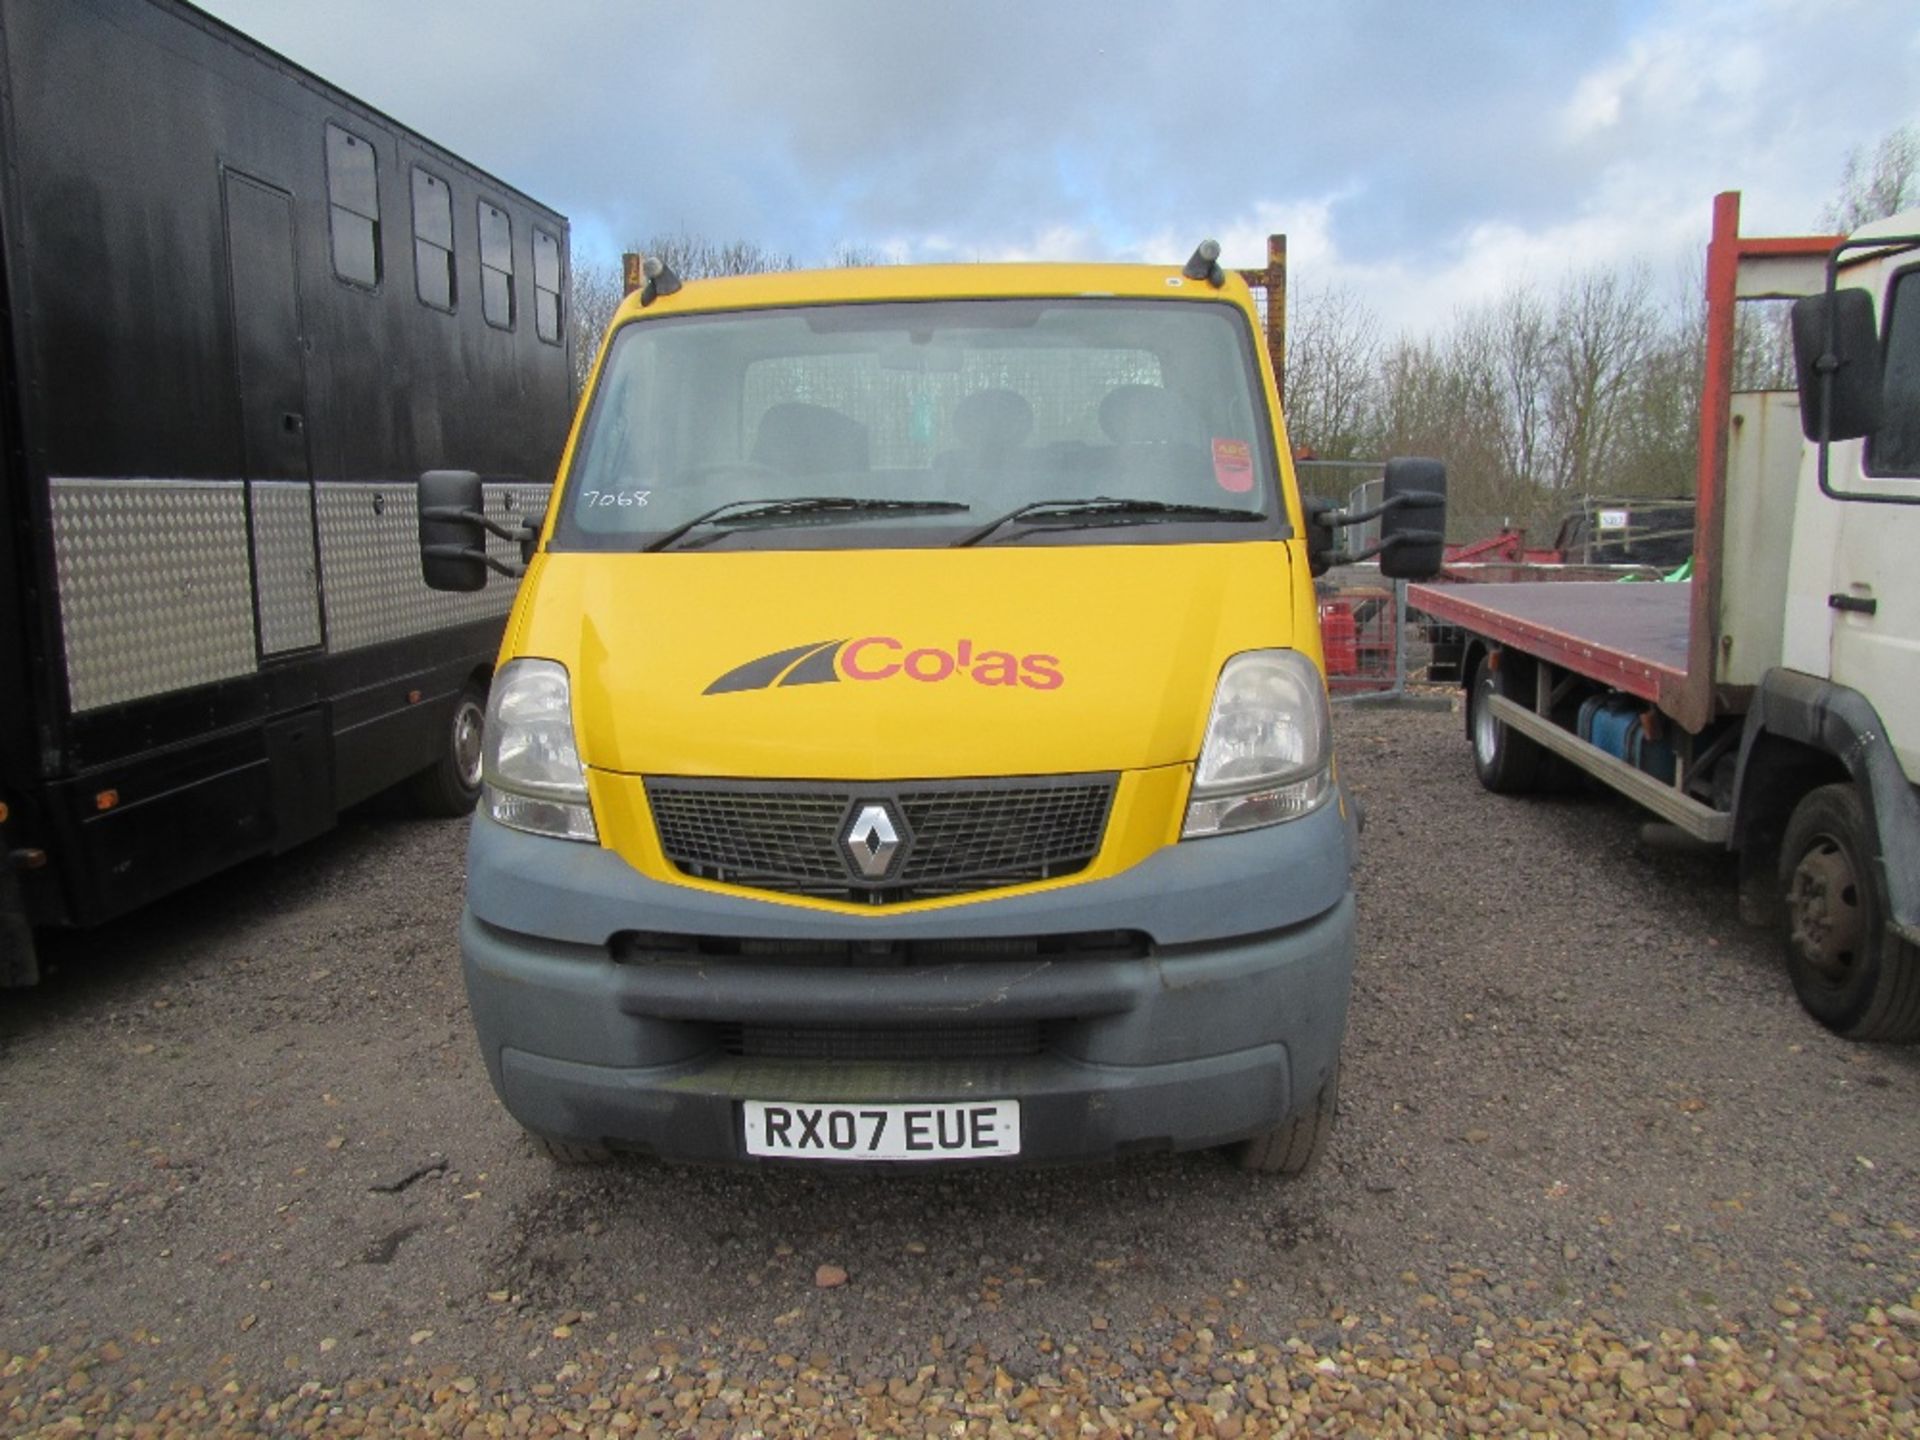 2007 Renault Mascot 3 Litre Diesel Flat Bed Dropside Truck c/w Central Locking. Reg Docs will be - Image 2 of 7